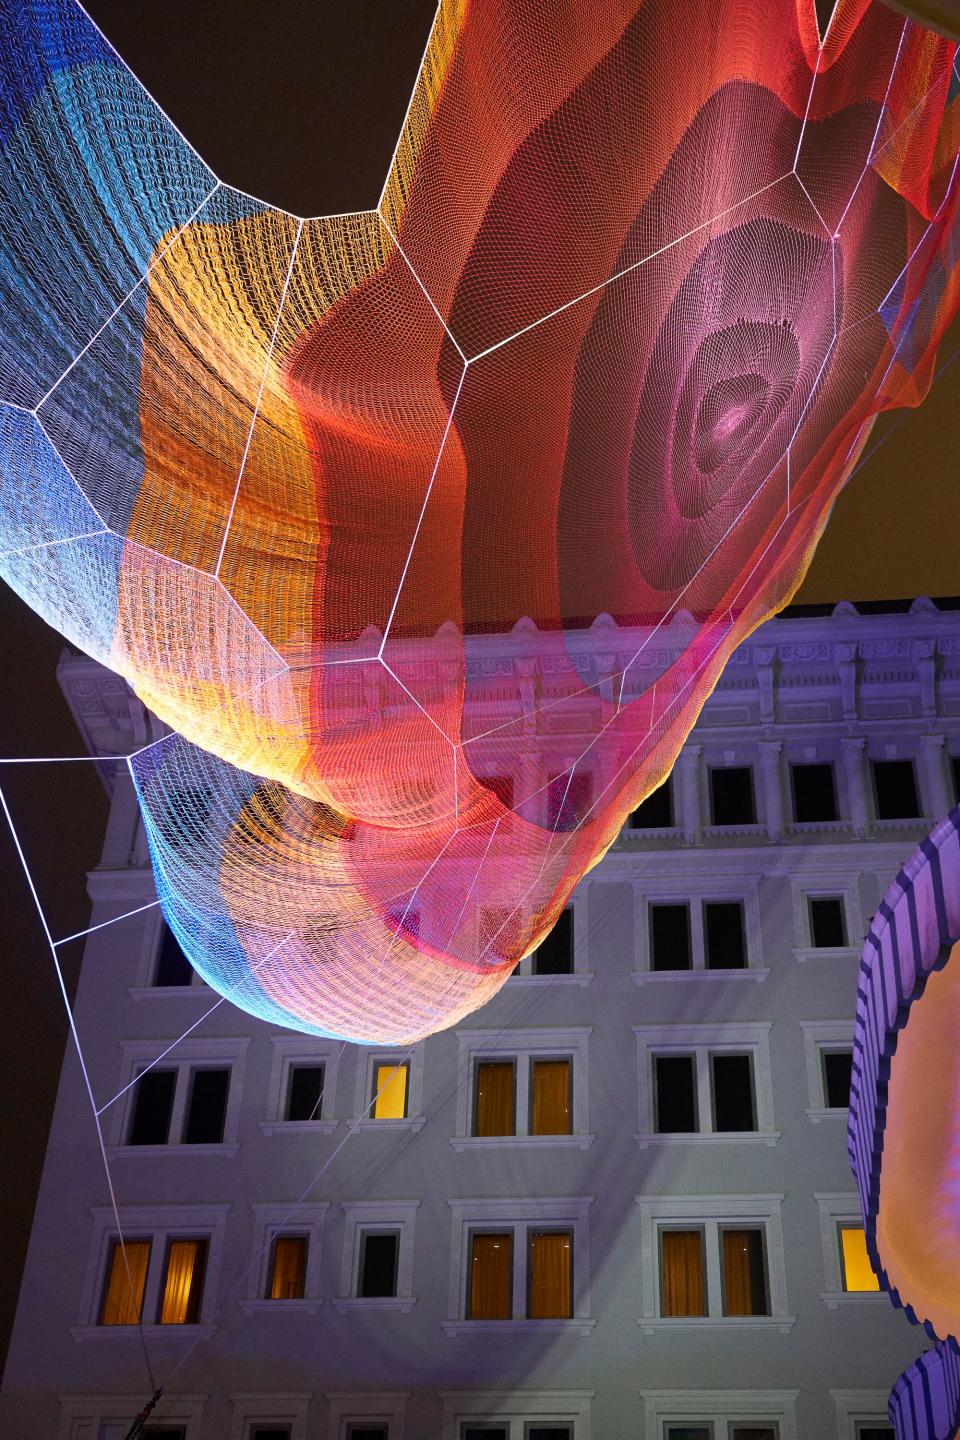 Close-up of Janet Echelman’s Earthtime 1.26 at the Peninsula Hong Kong, part of the brand’s “Art in Resonance” program.